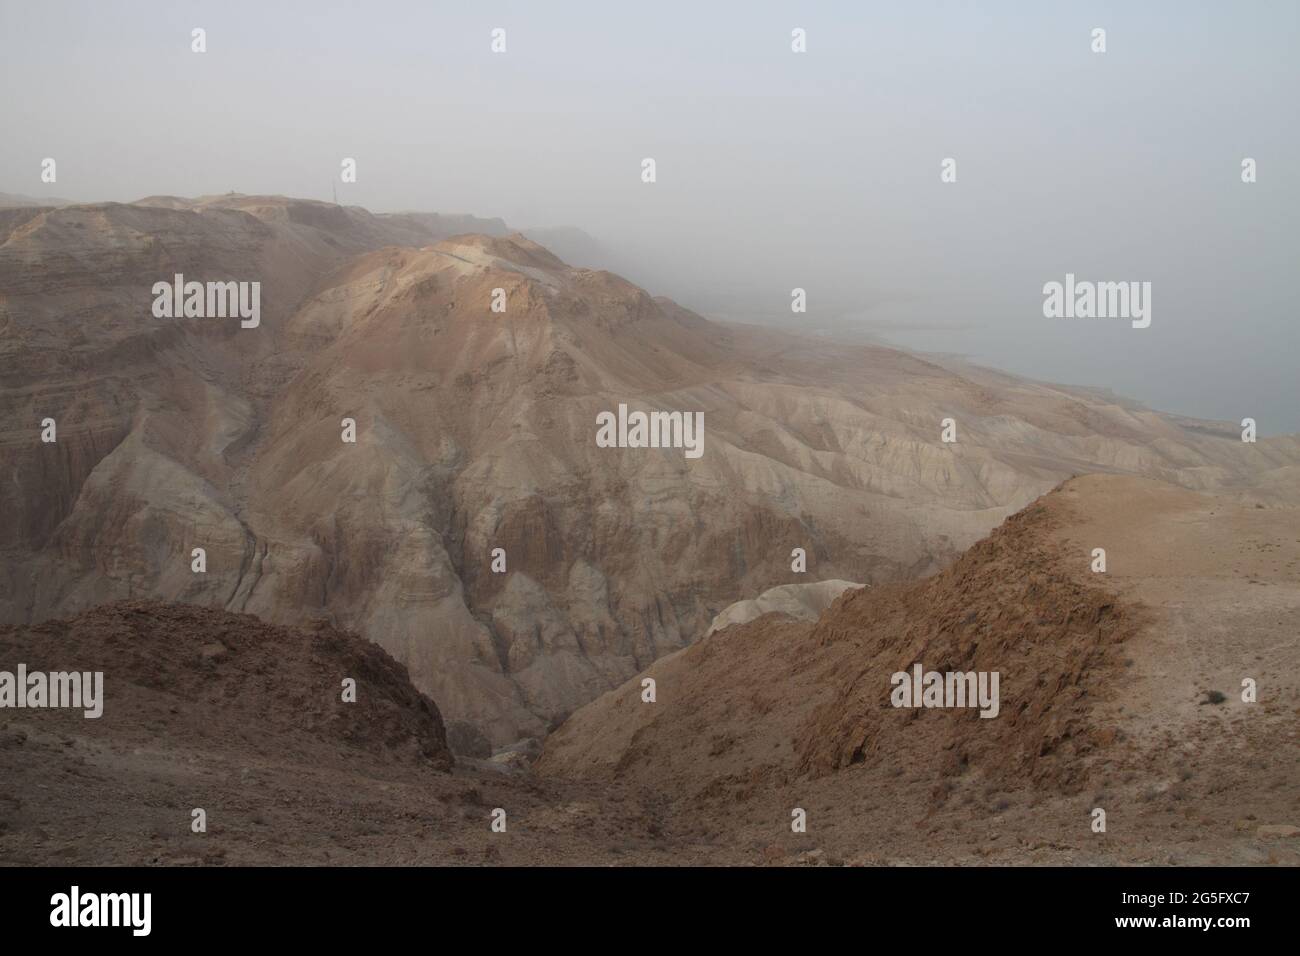 Awesome view at sunset of the steep walls of Nachal Dragot or Darga & it's ravine in the Judean Desert and the Dead Sea on an overcast and foggy day. Stock Photo